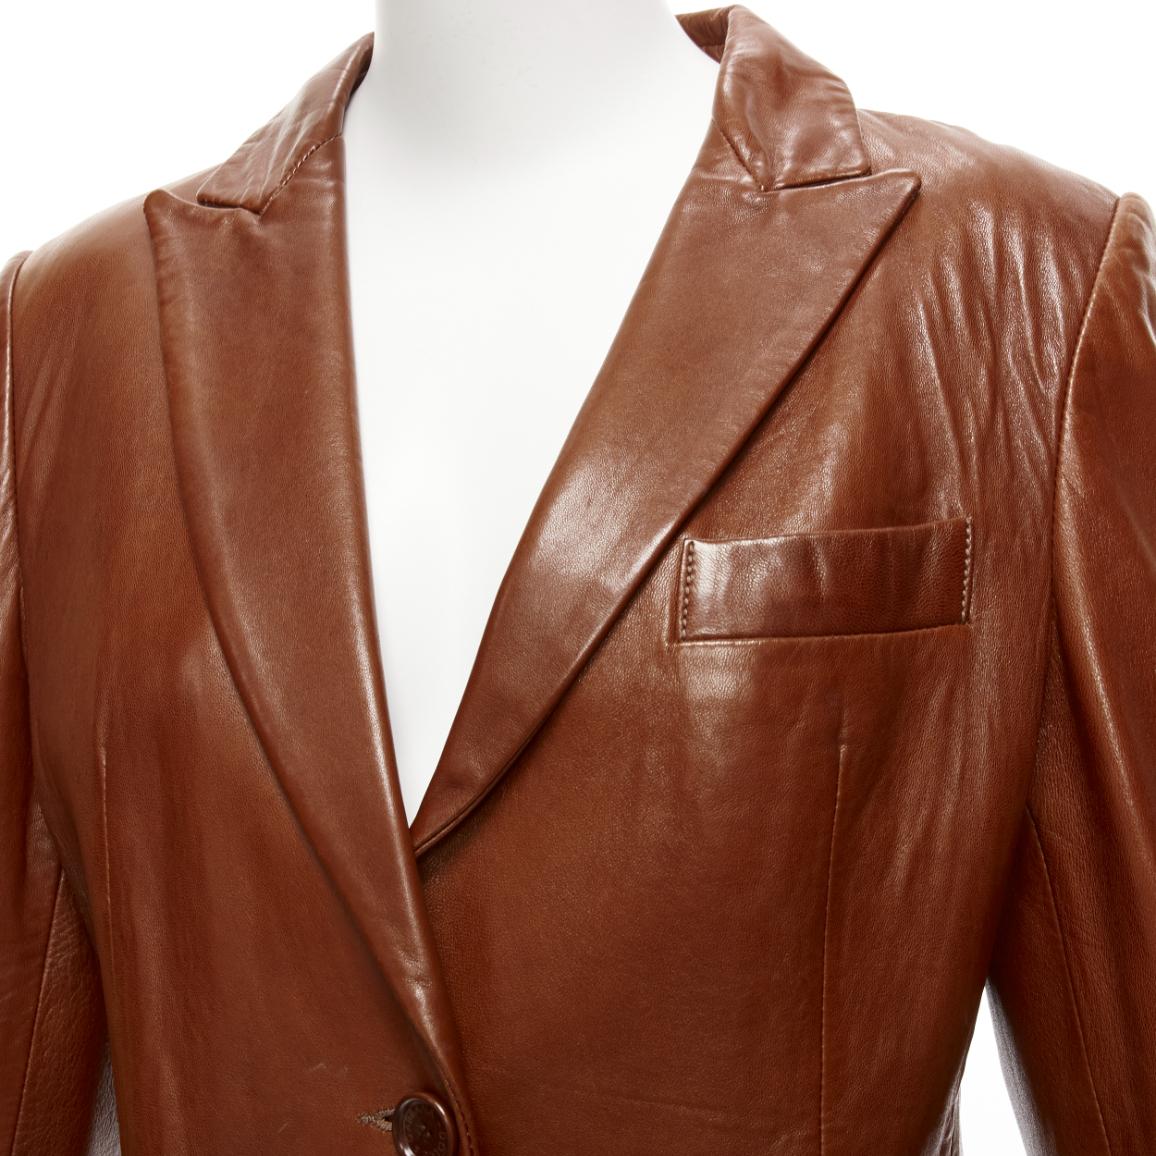 DOLCE GABBANA 1990s Vintage brown real leather pocketed blazer jacket UK8 S
Reference: TGAS/D01121
Brand: Dolce Gabbana
Designer: Domenico Dolce and Stefano Gabbana
Material: Leather
Color: Brown
Pattern: Solid
Closure: Button
Lining: Multicolour